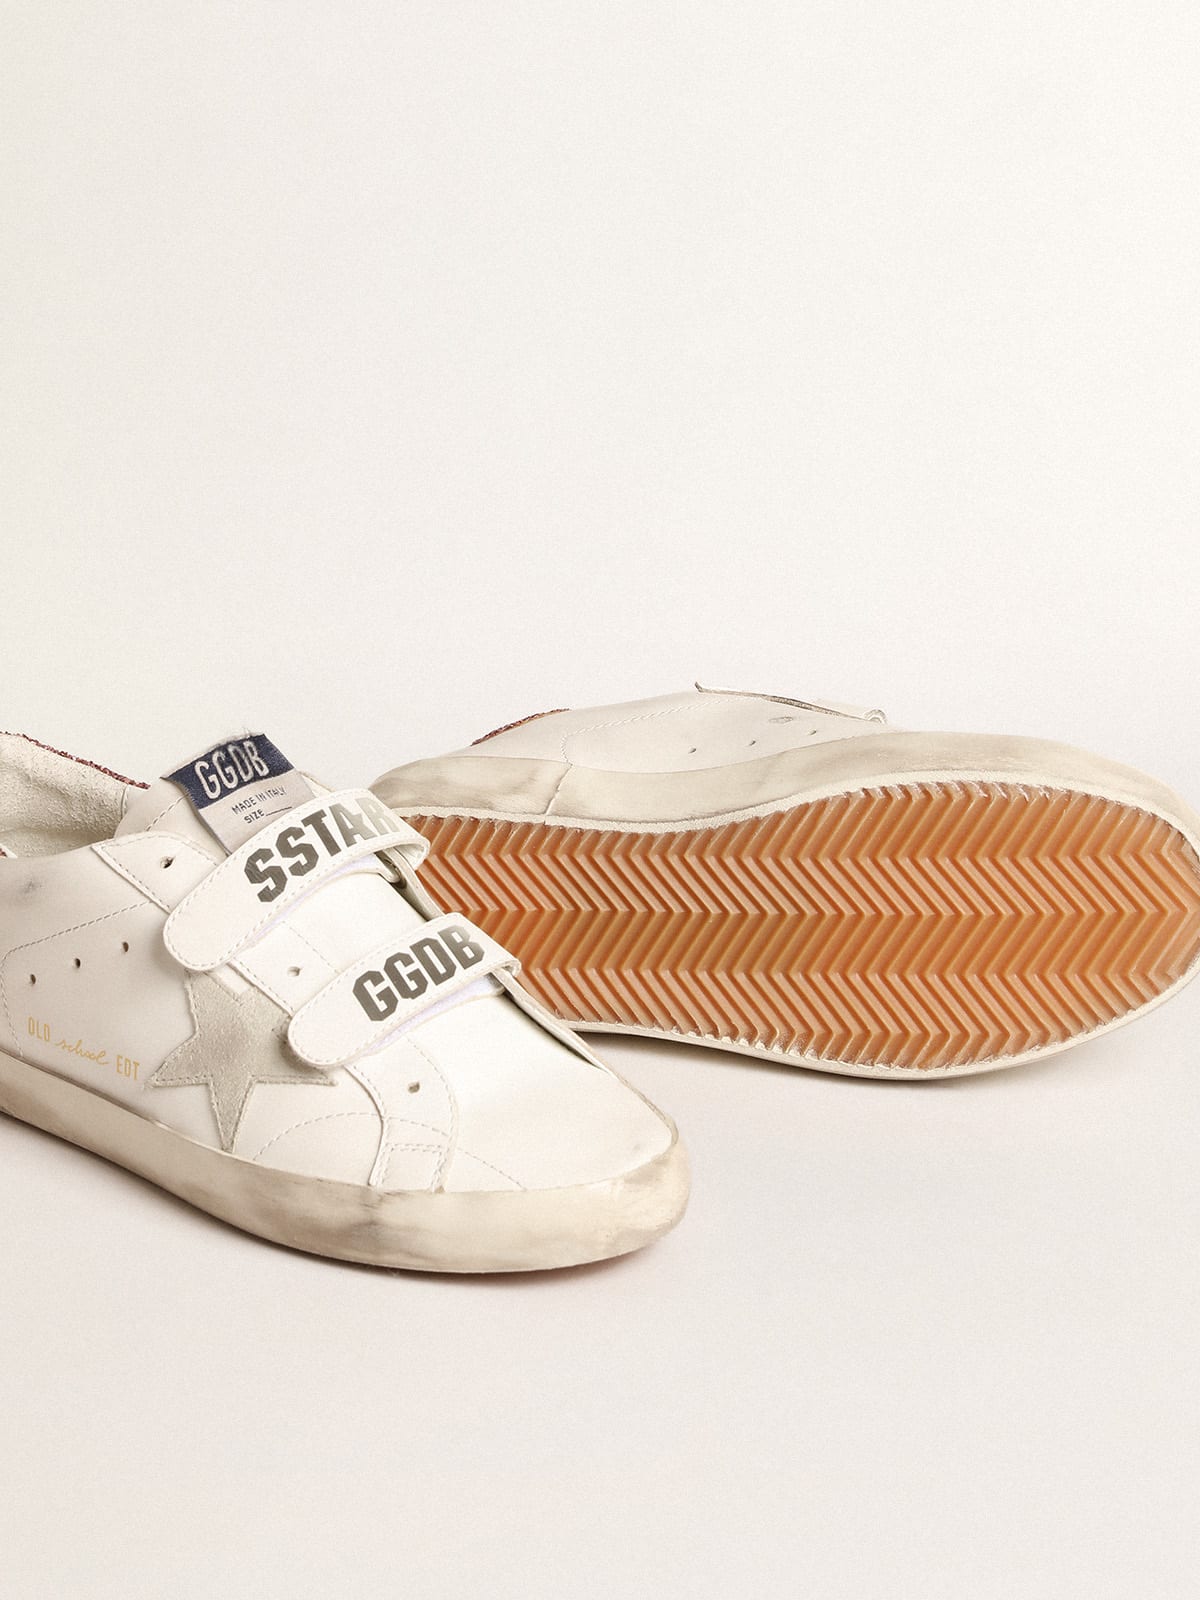 Golden Goose - Old School with ice-gray suede star and glitter heel tab in 